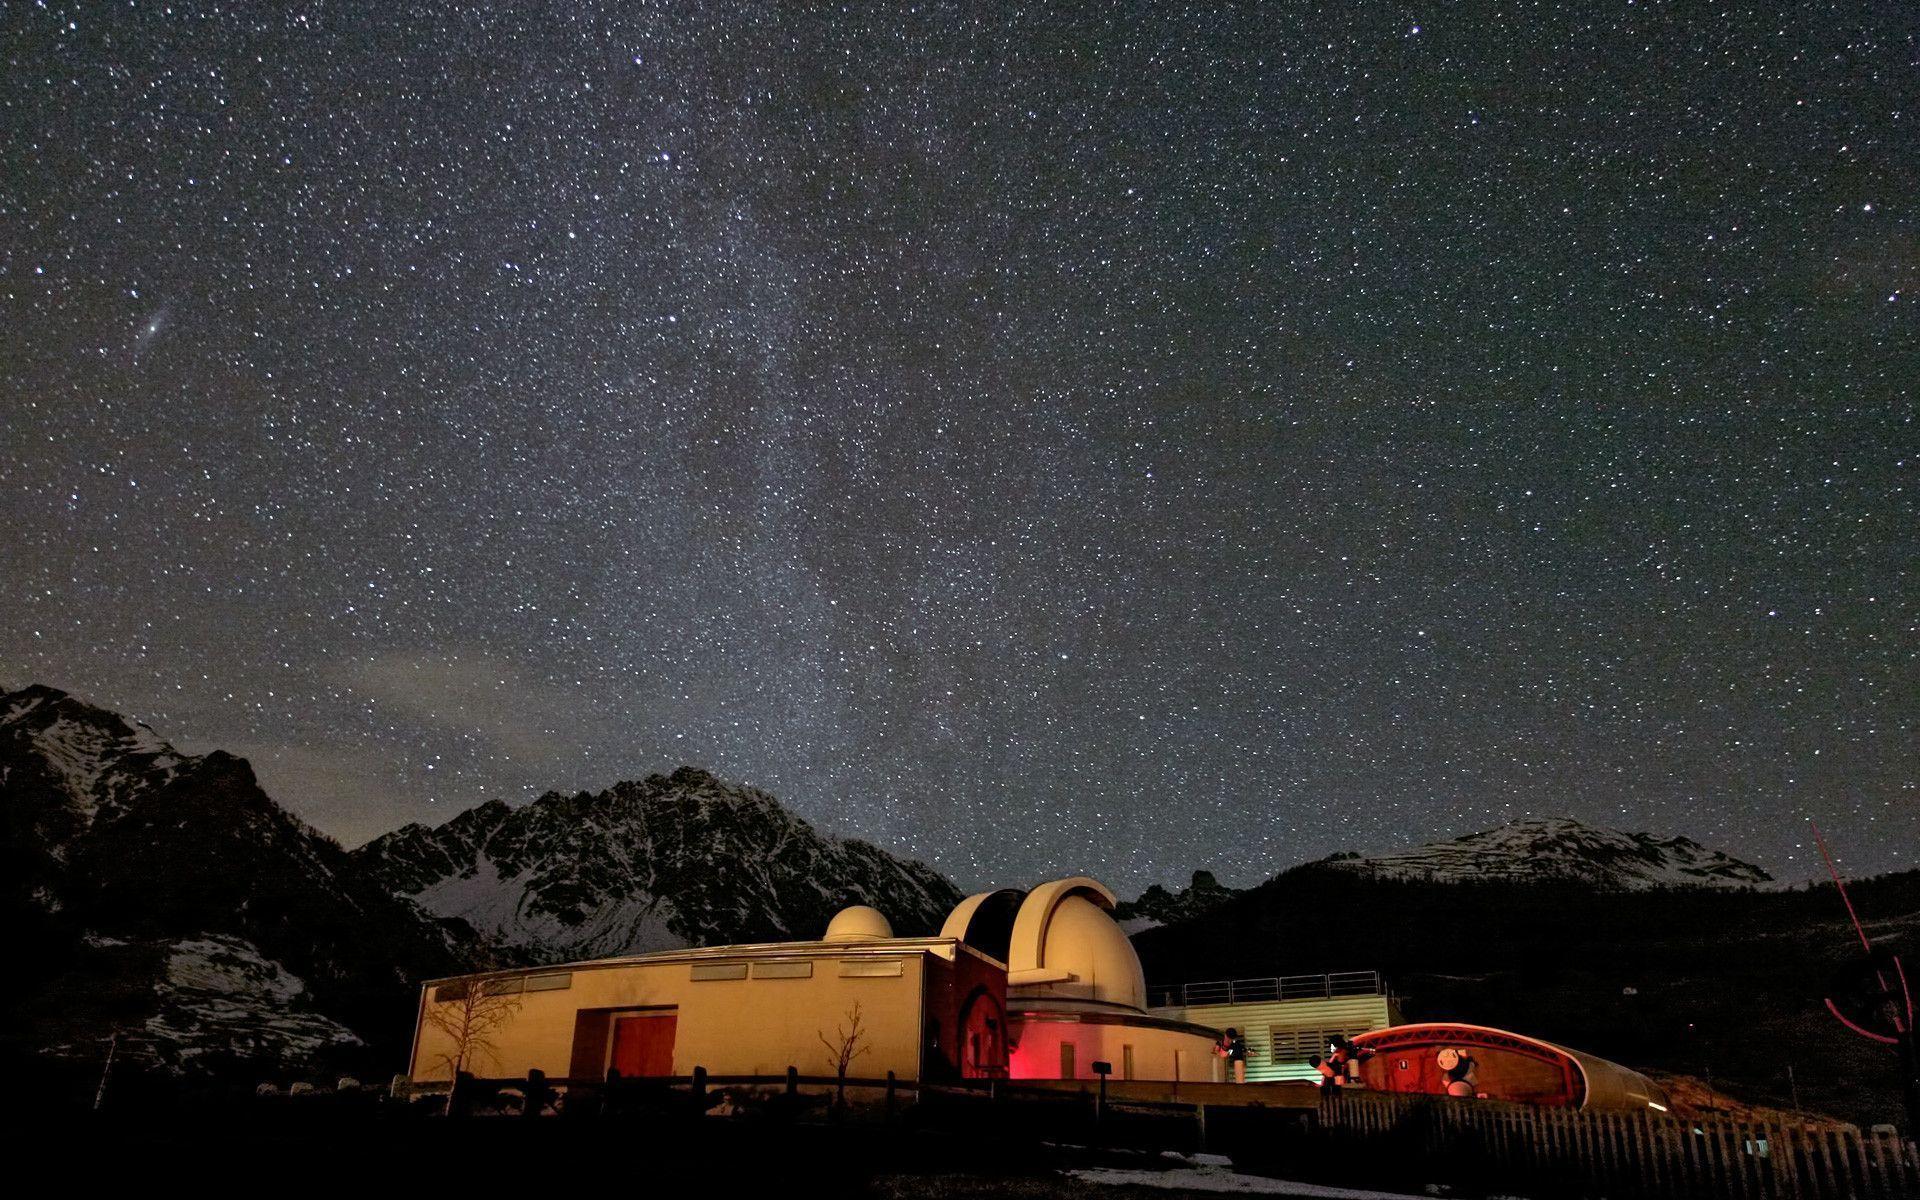 FileThe Astronomical Observatory of the Aosta Valley